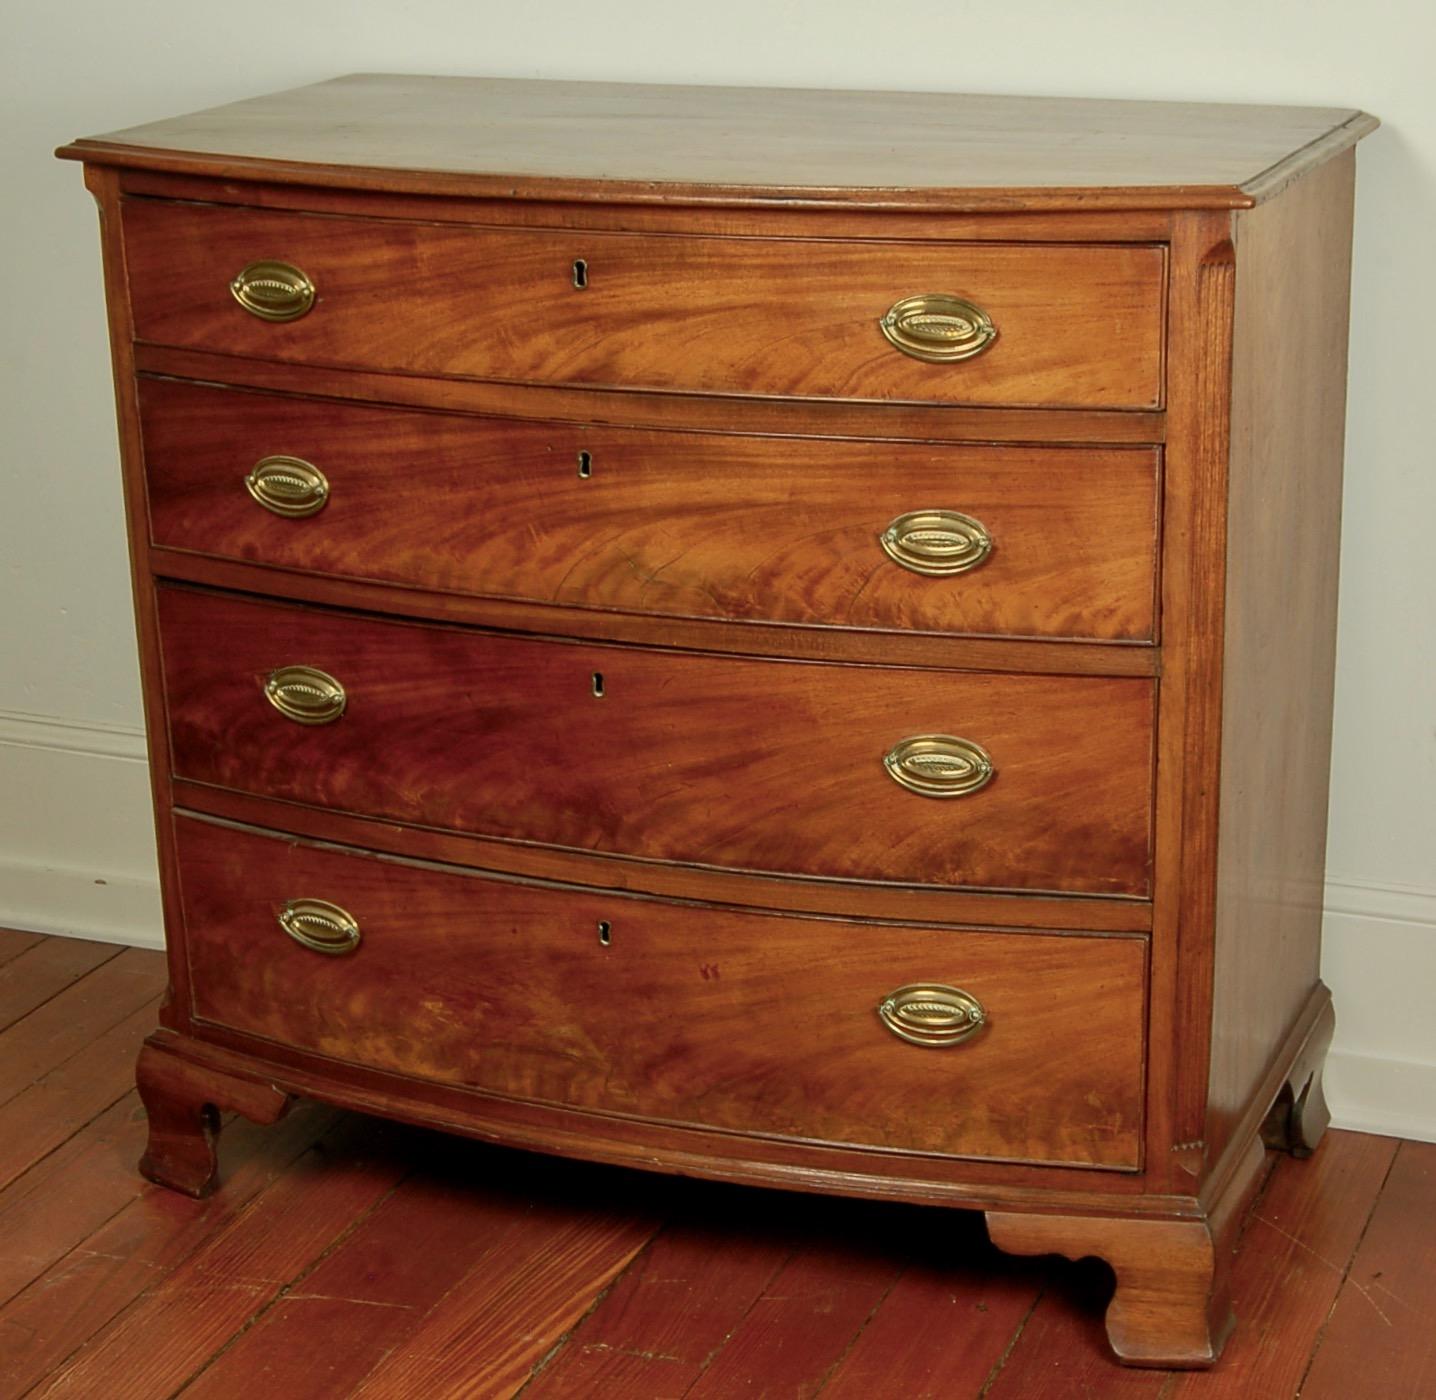 4-drawer bowfront chest